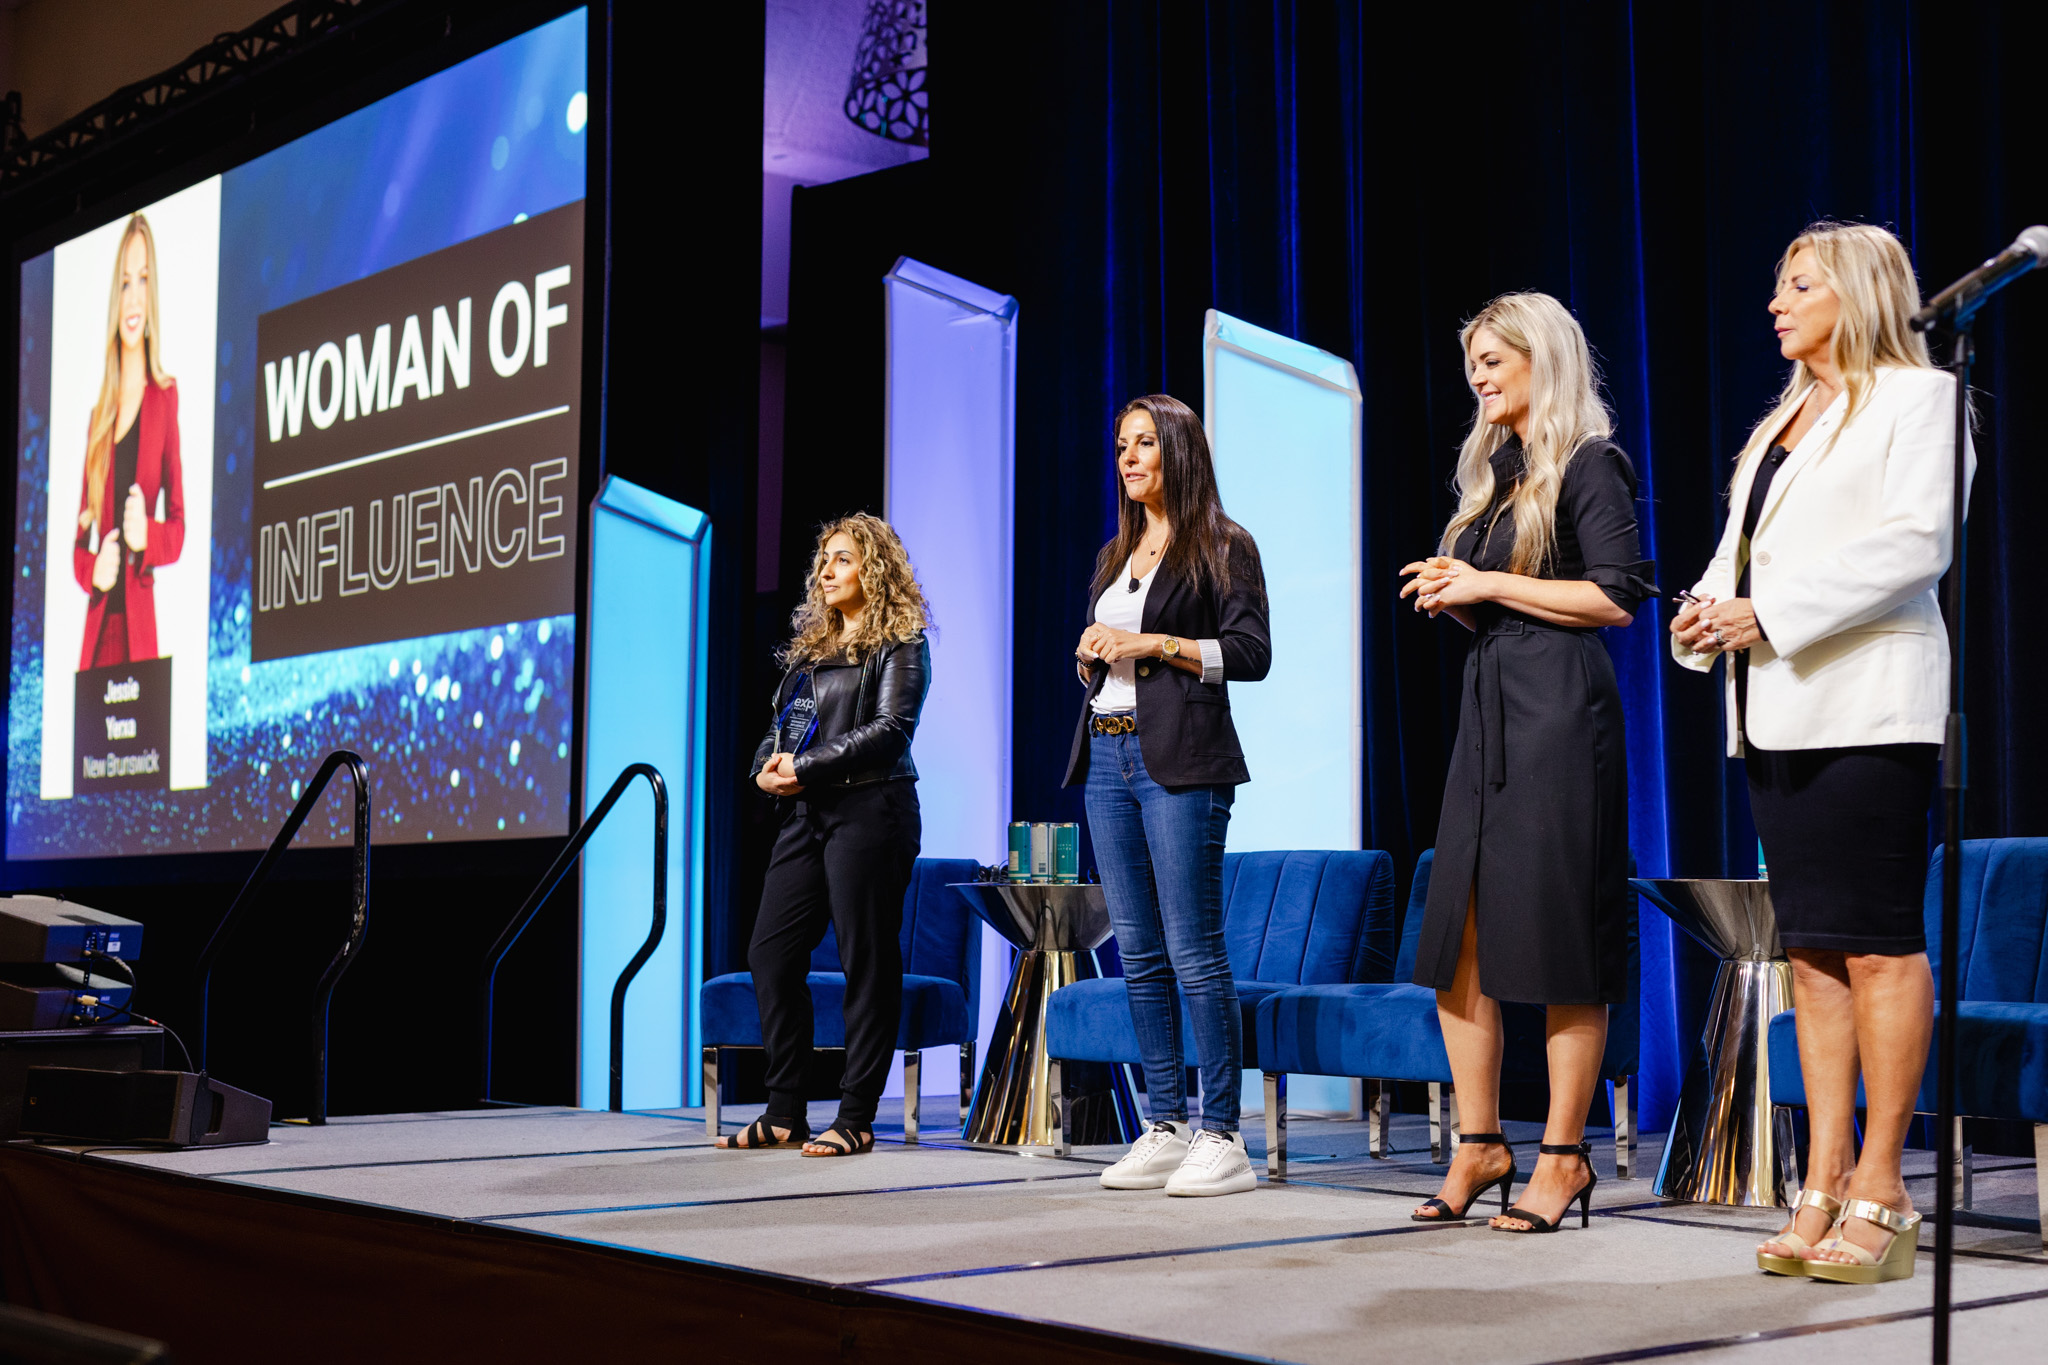 Four women stand on a stage next to a large screen displaying "Woman of Influence." The screen features a portrait of Nicole Arbour, highlighted in an elegant corporate photography style. Chairs and tables are arranged neatly in the background.